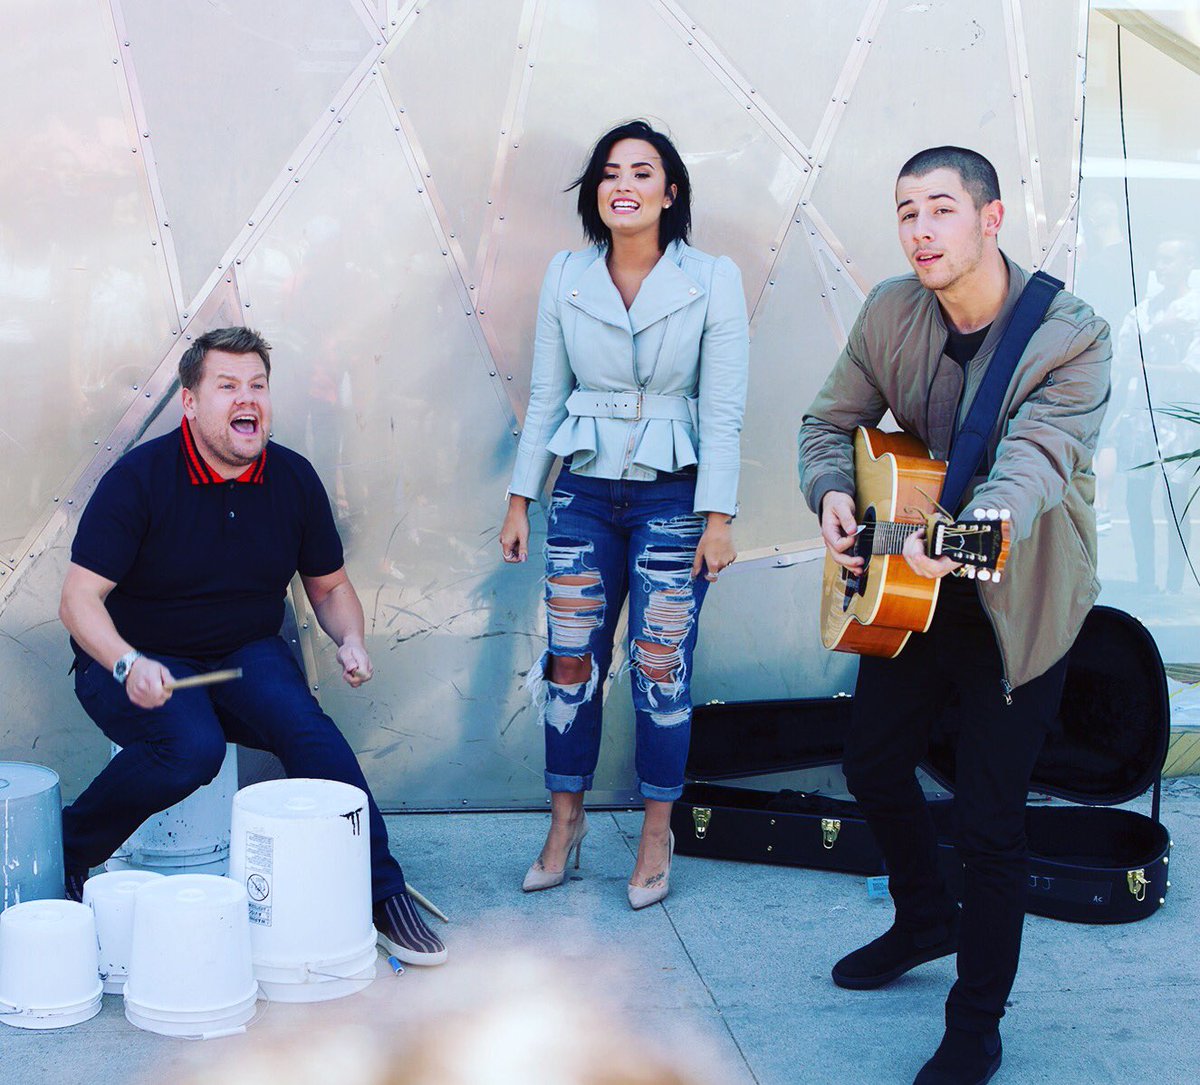 RT @nickjonas: First performance with the new band. Drummer's cool but he talks a lot. #carpoolkaraoke #tonight @latelateshow https://t.co/…